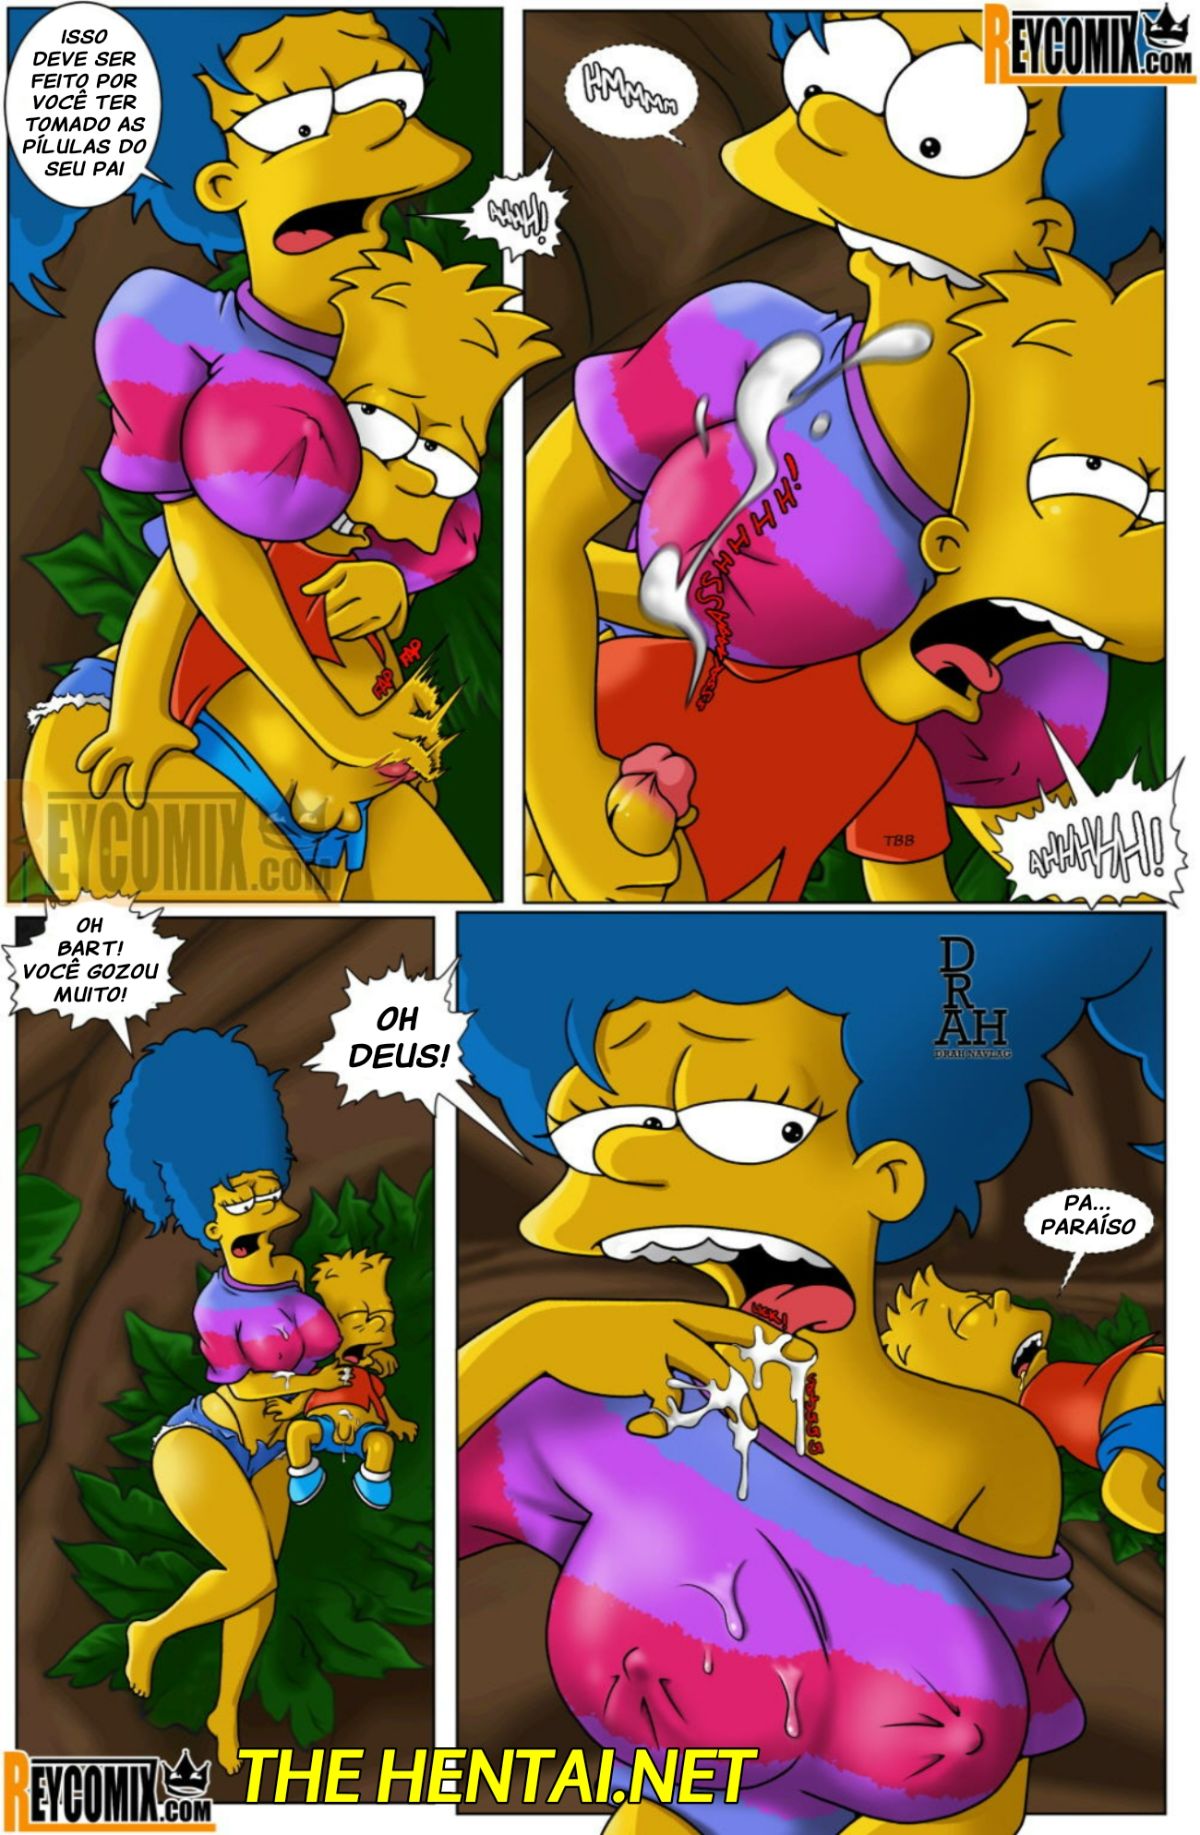 The Simpsons Paradise Hentai pt-br 16